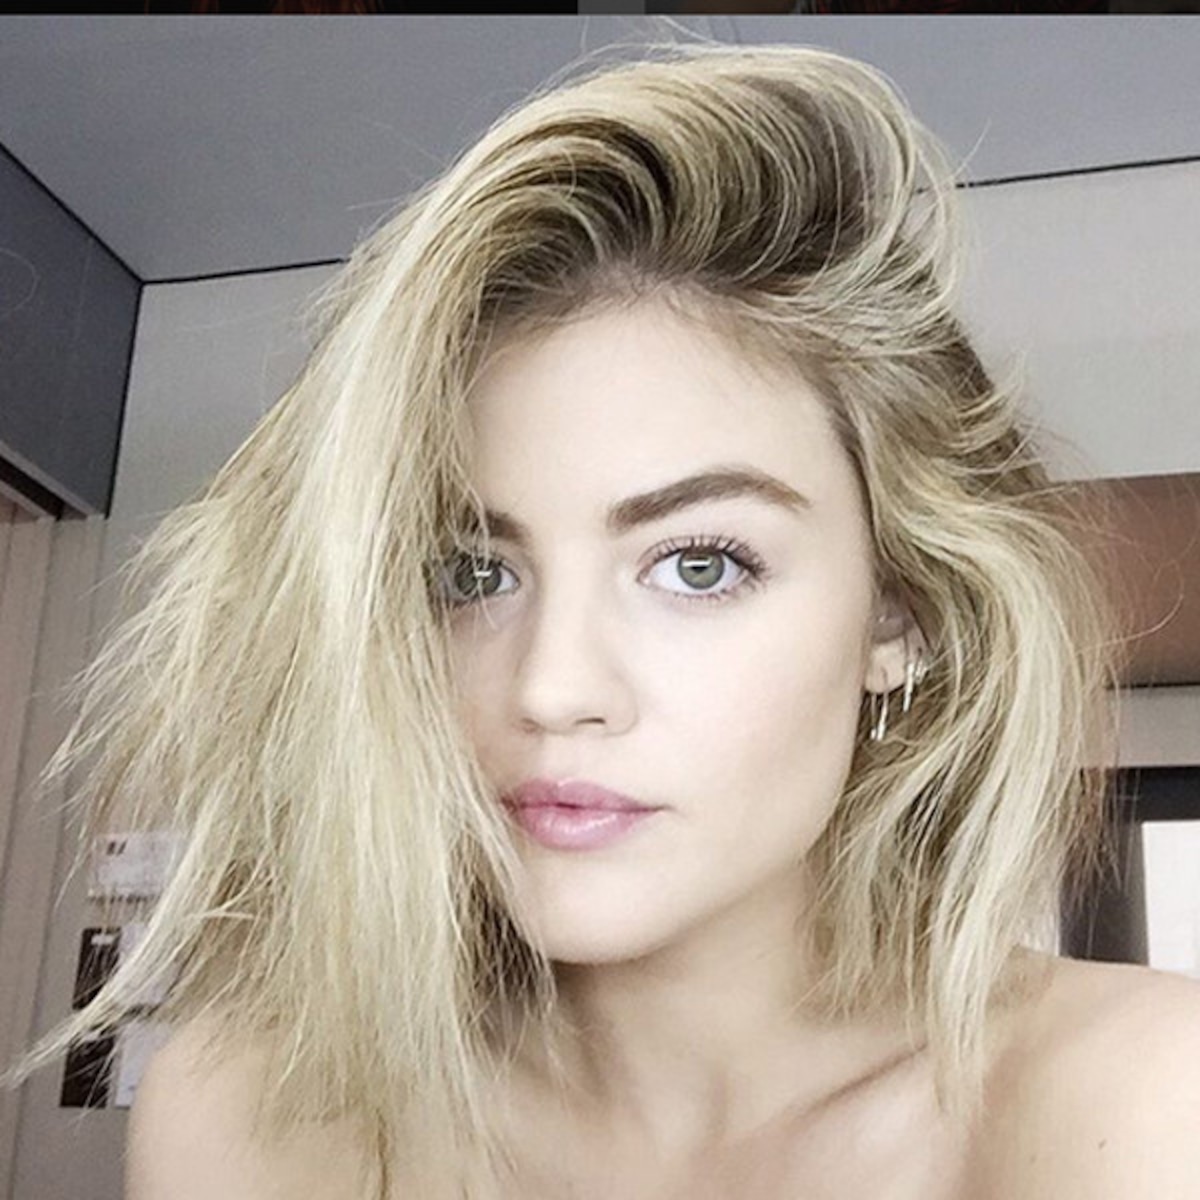 Lucy hale nude photo hack